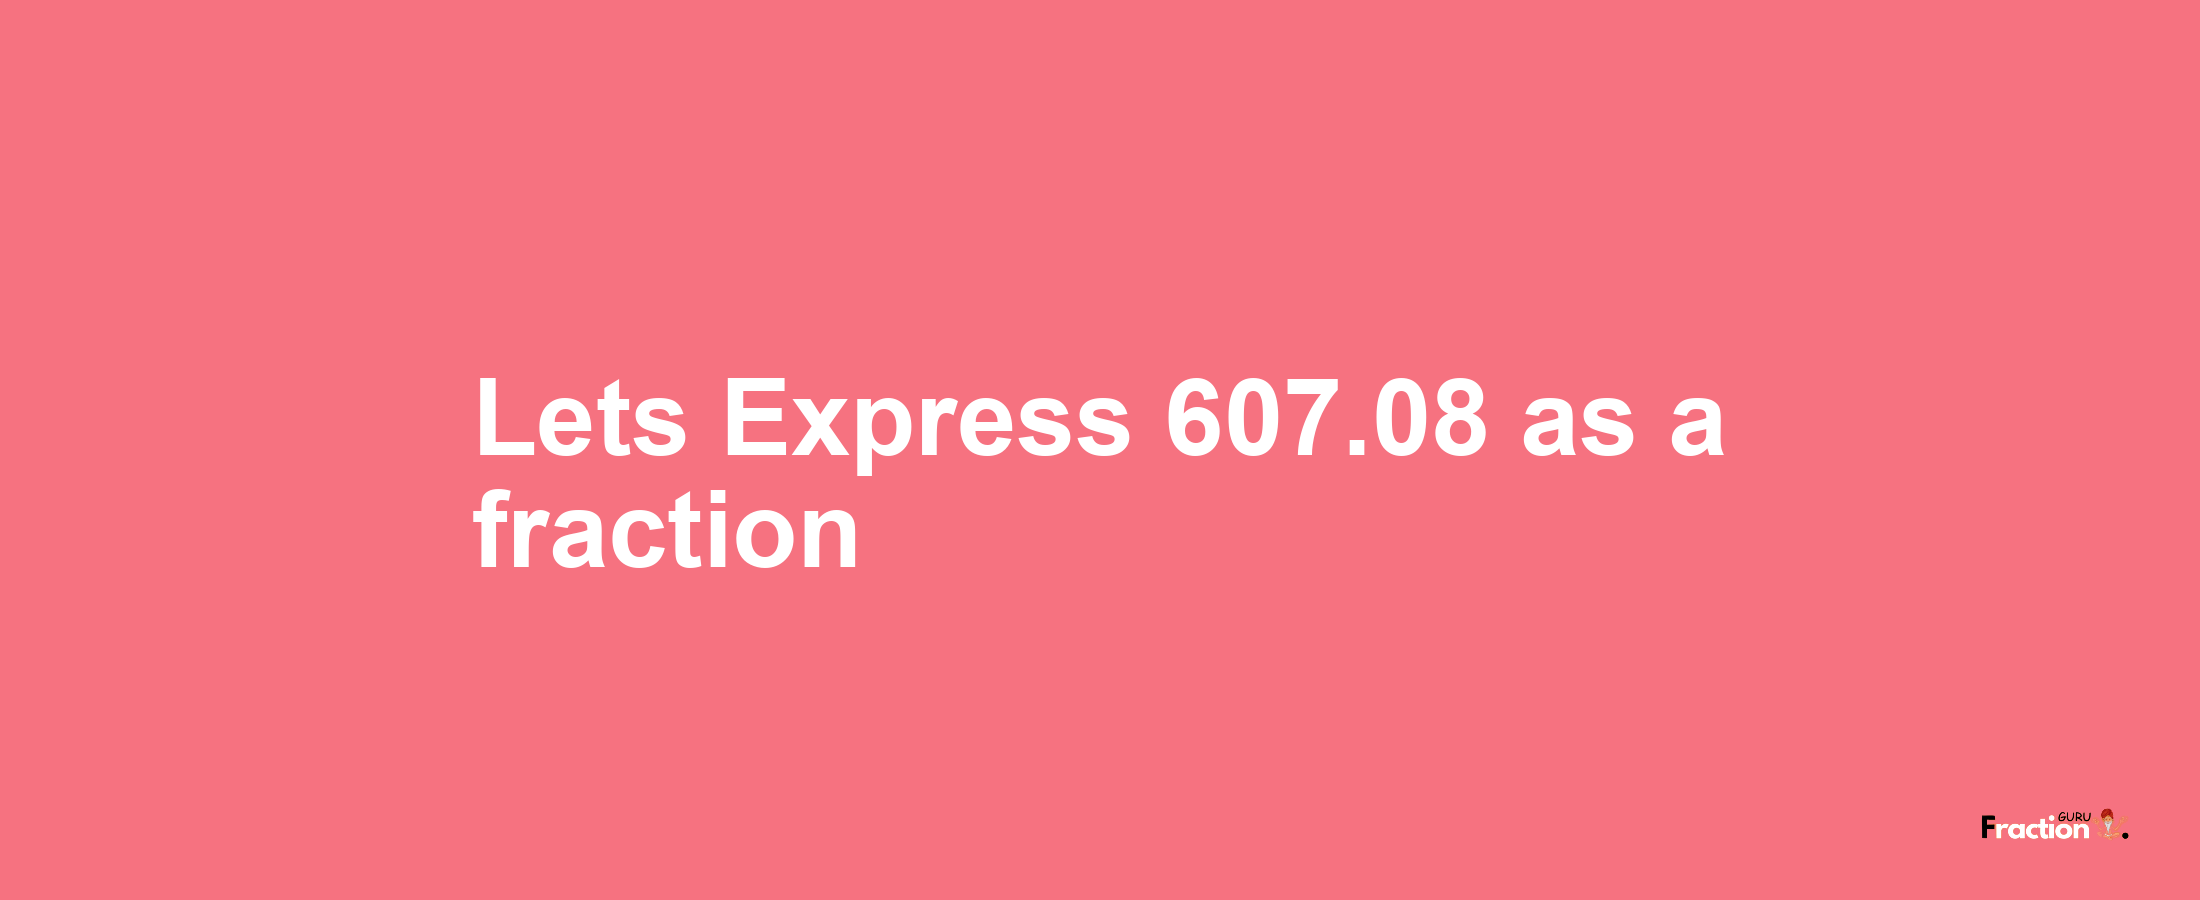 Lets Express 607.08 as afraction